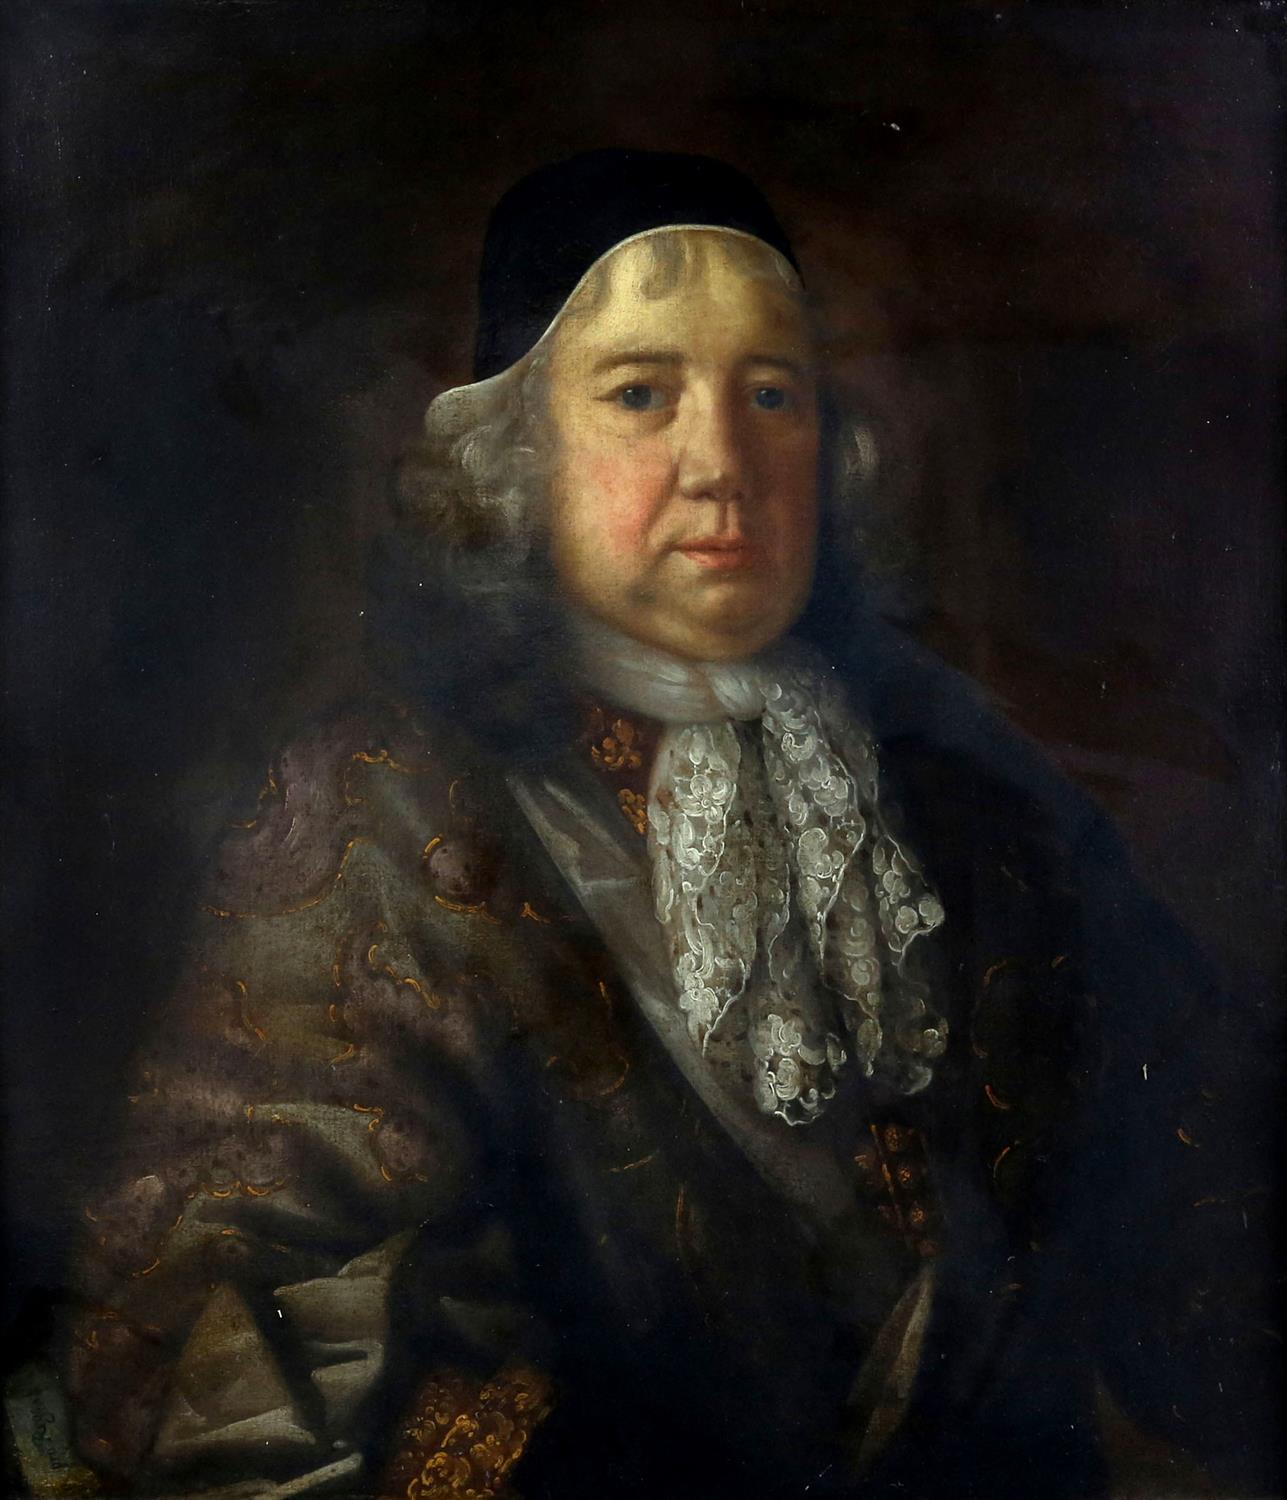 17th / 18th century British school, portrait of a gentleman wearing cap and a lace cravat,